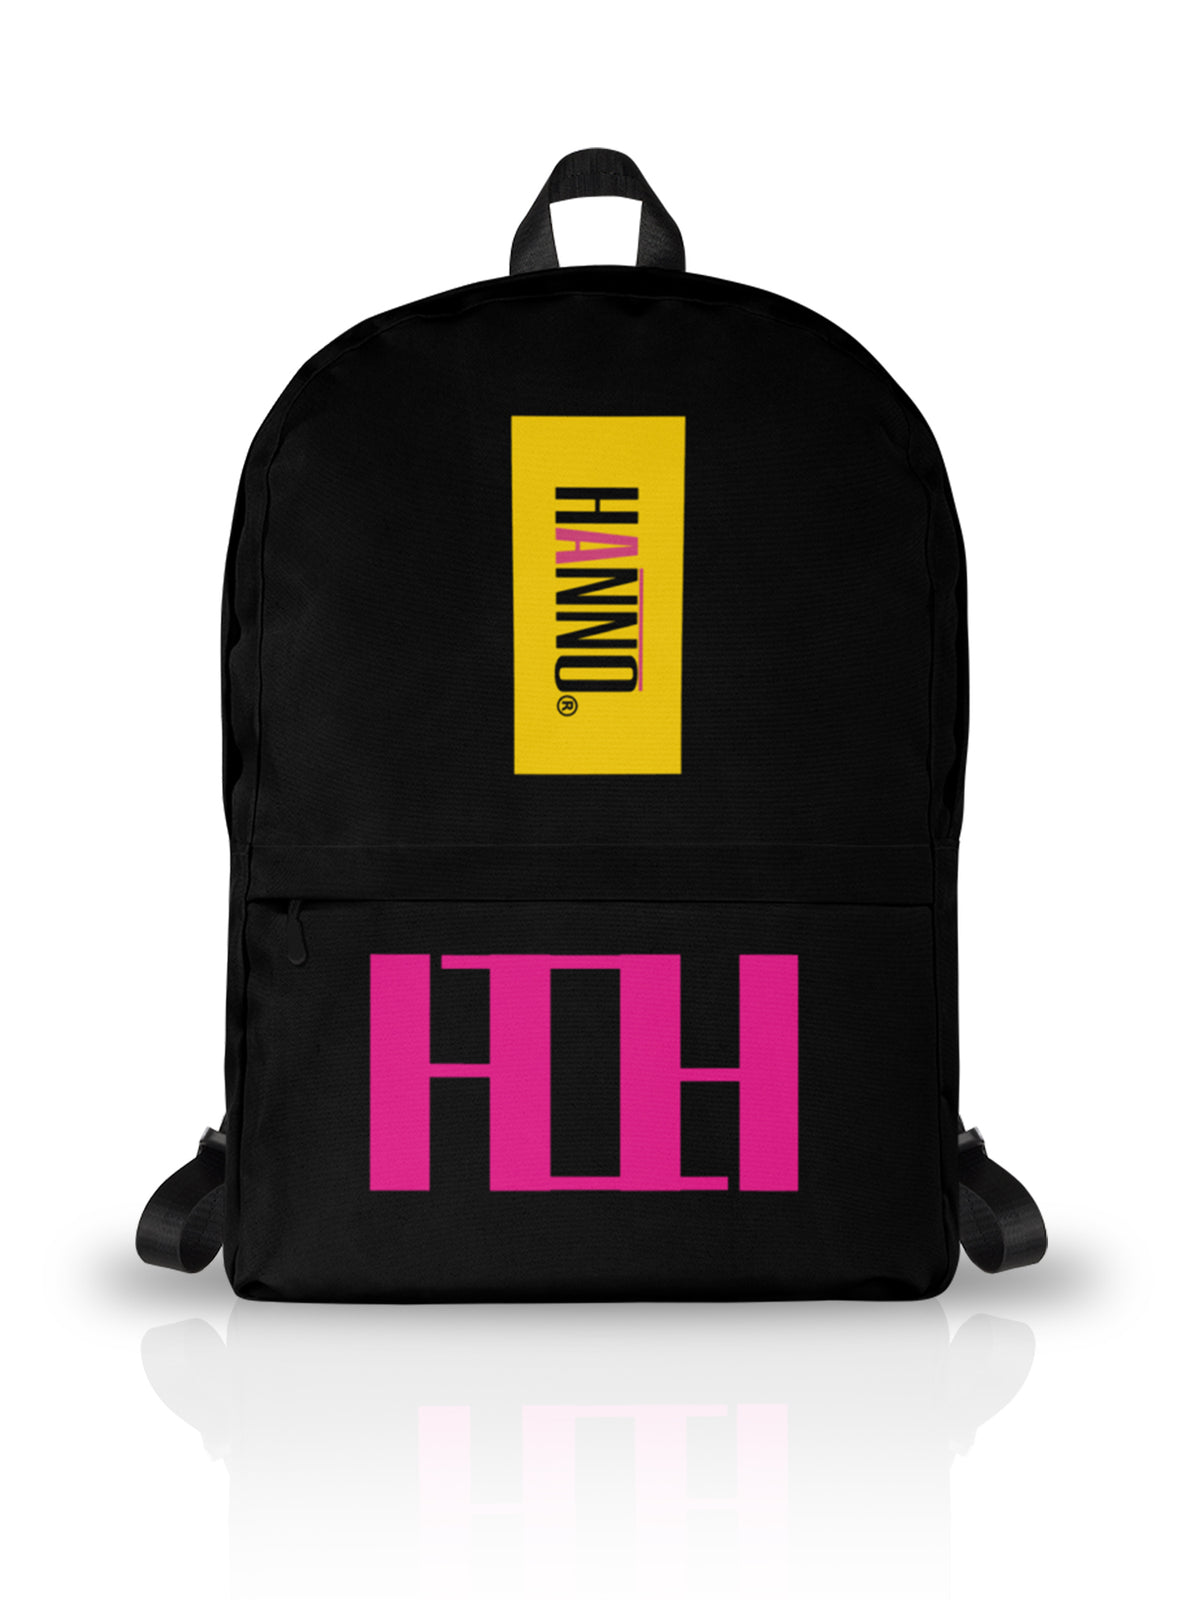 Black backpack with yellow and pick